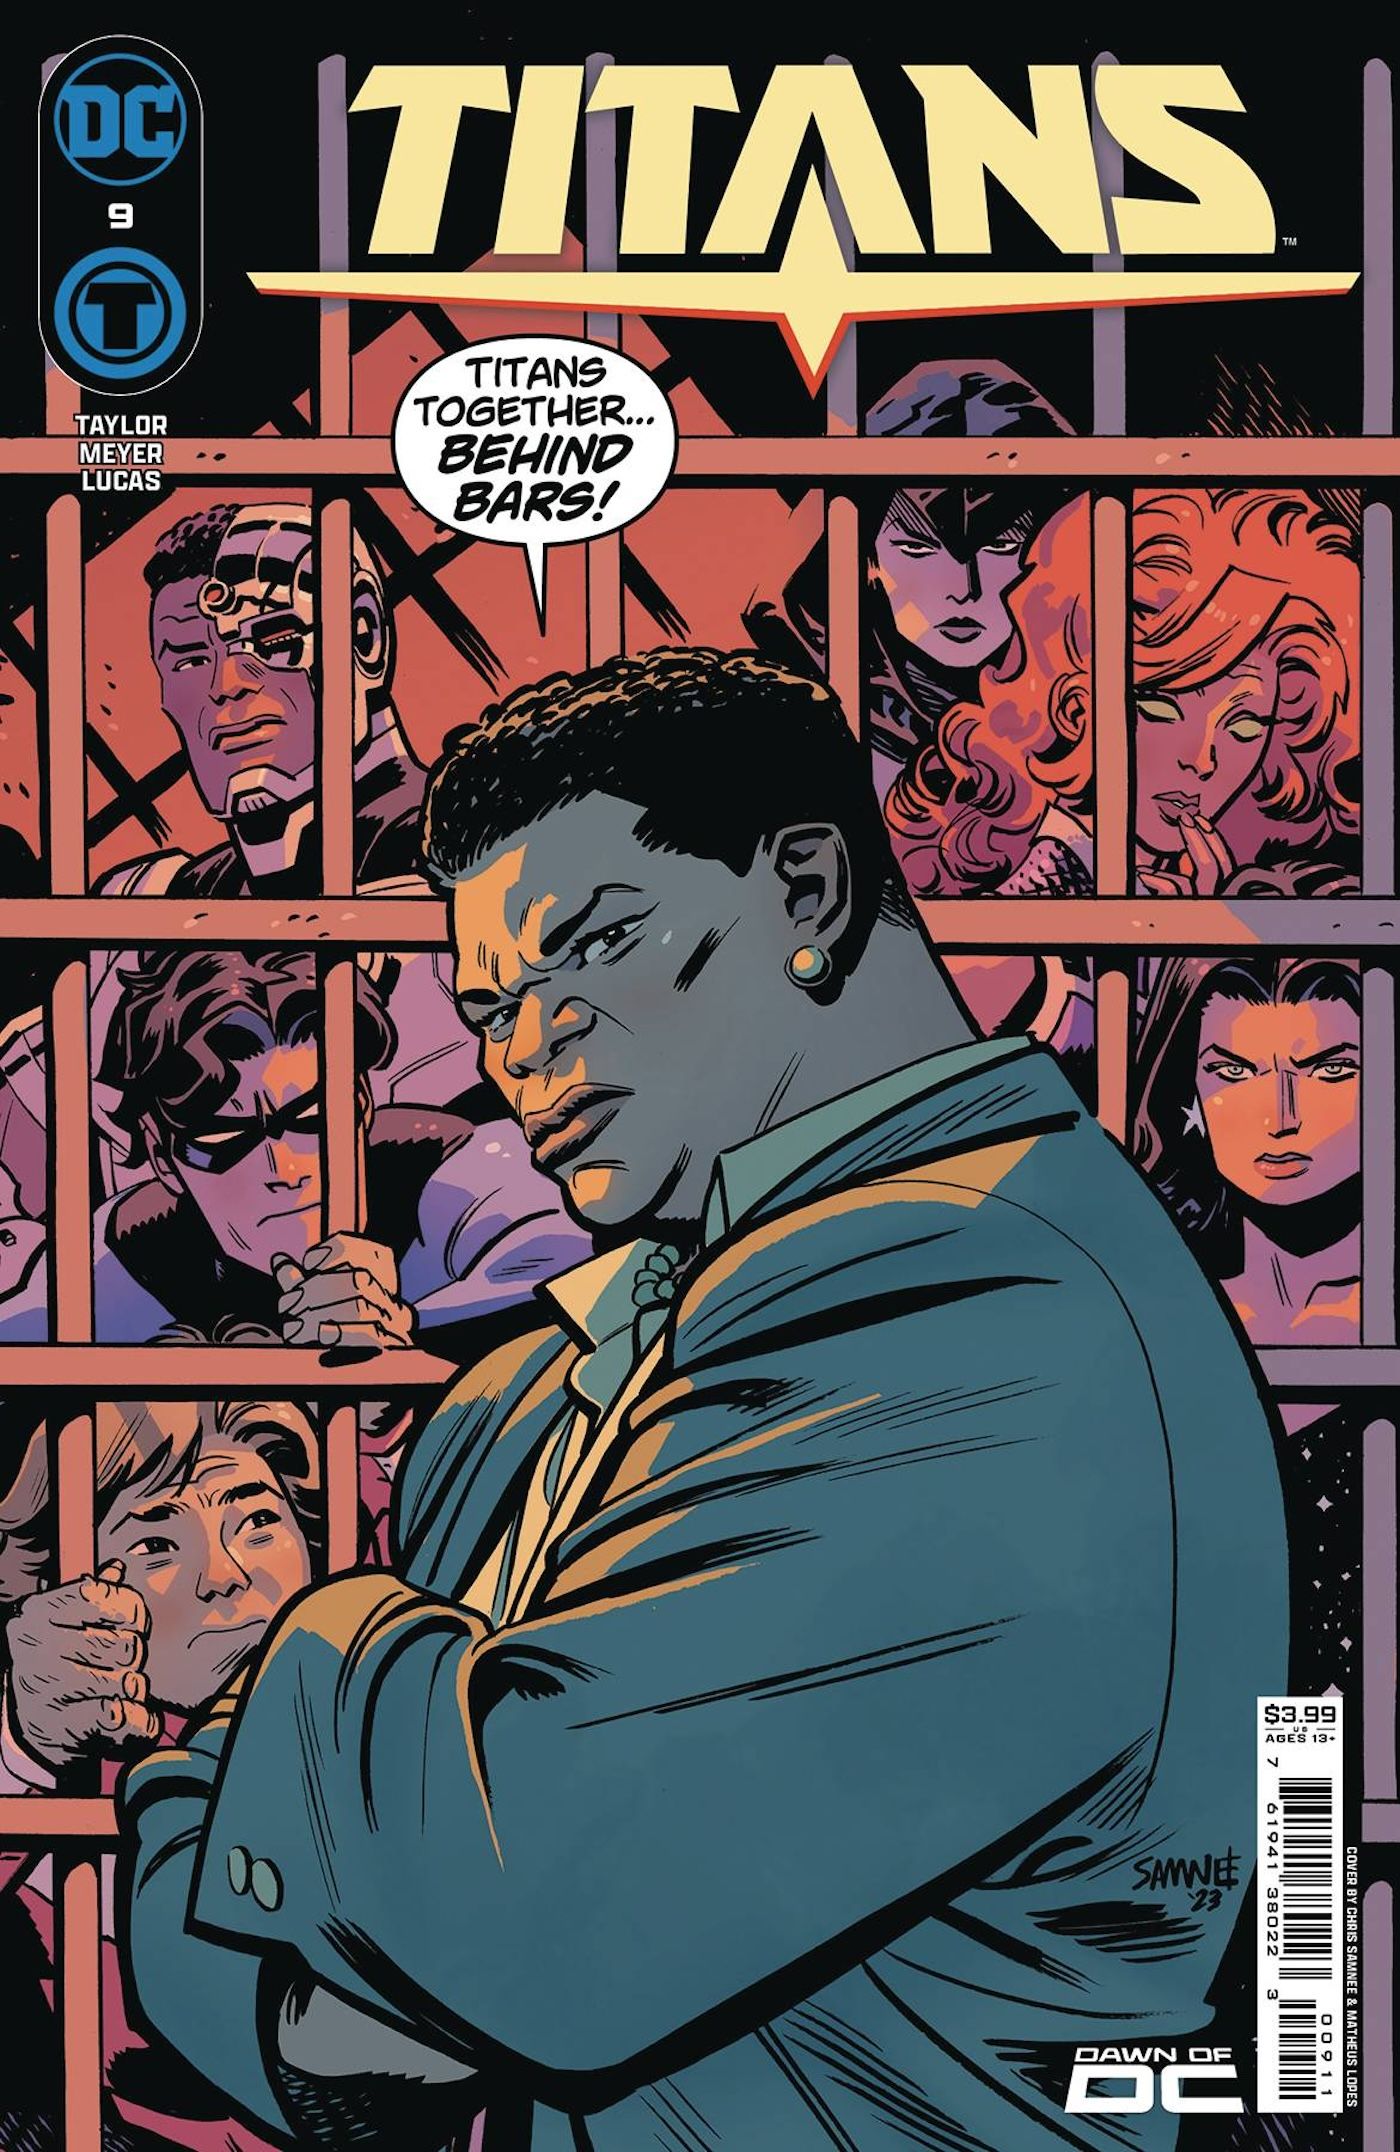 Titans 9 Main Cover: Amanda Waller stands in front of the Titans, who are in a prison cell.